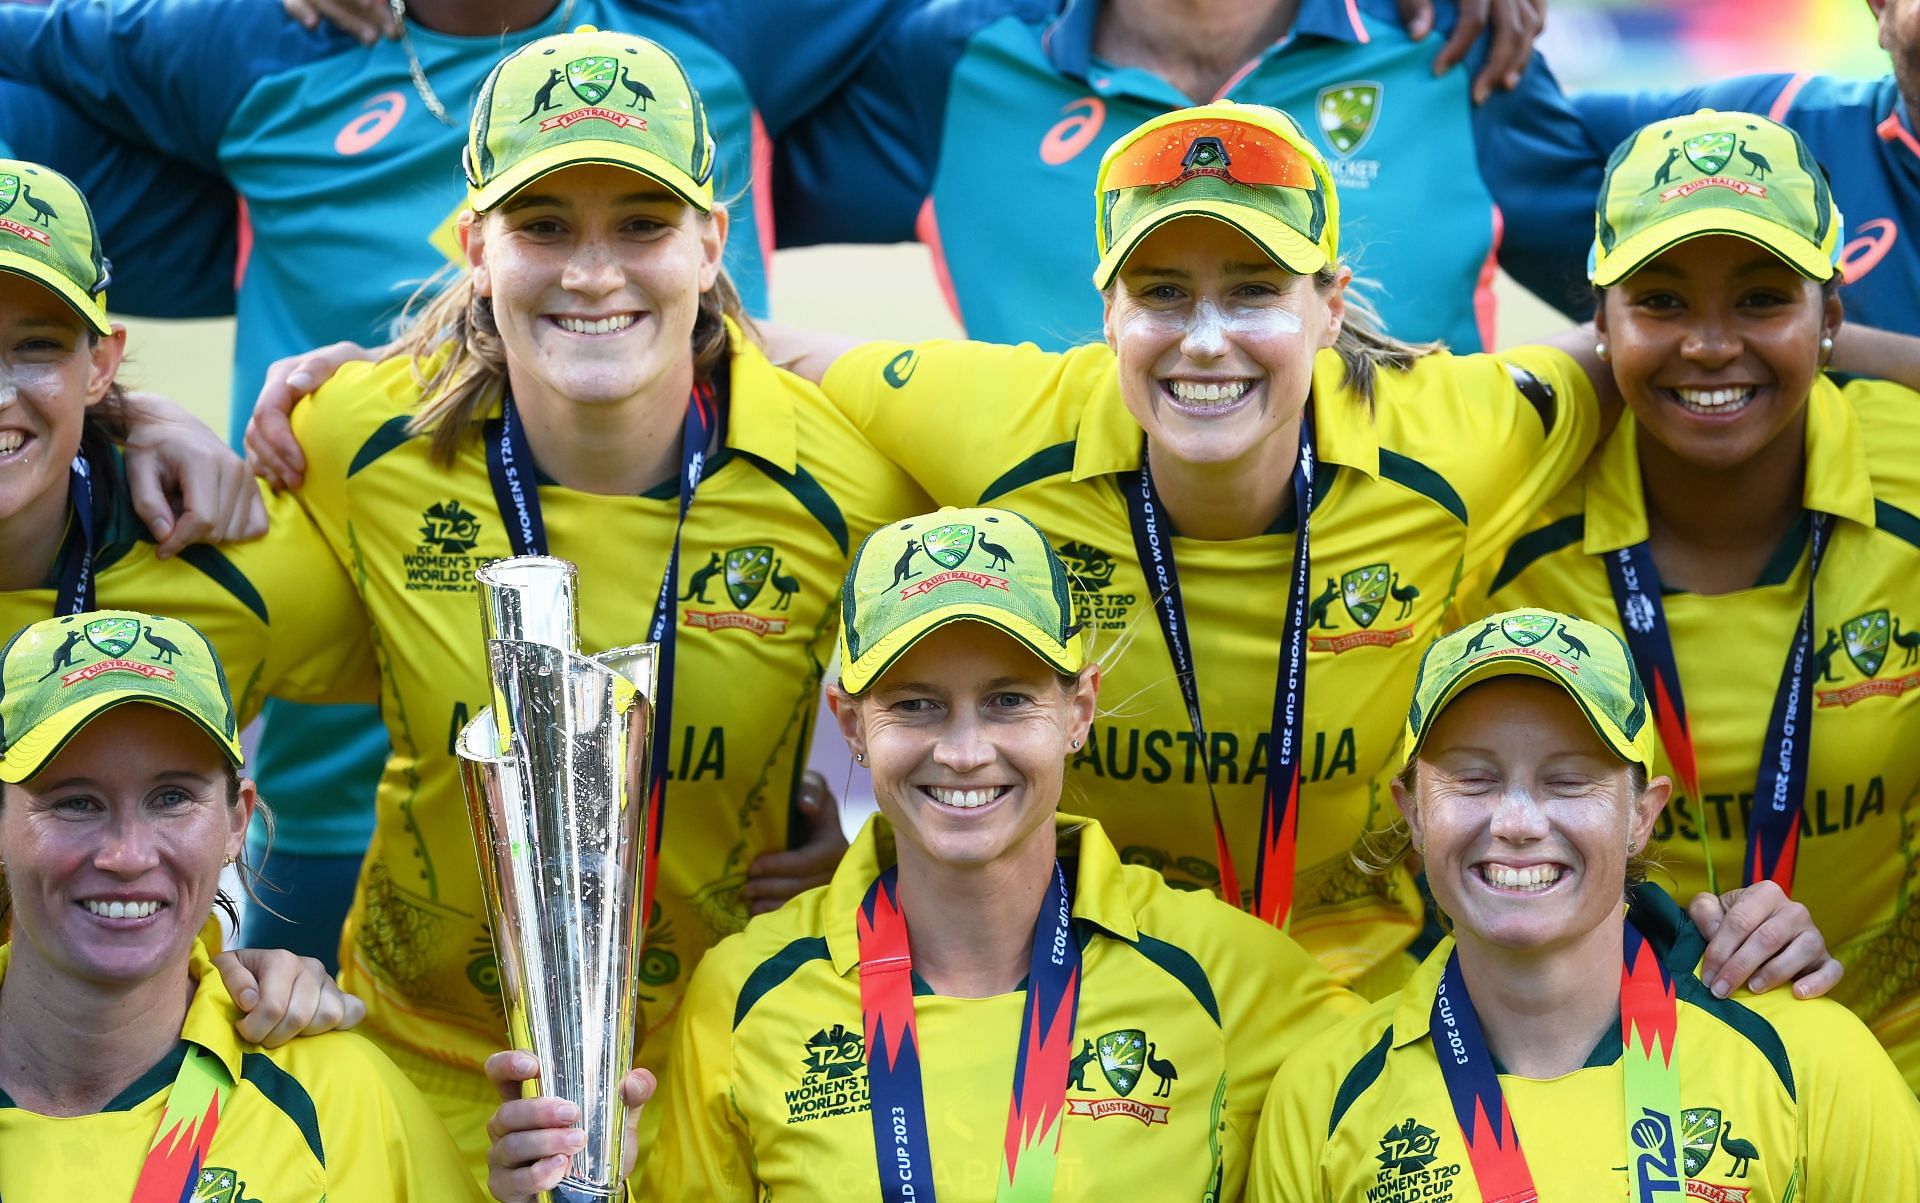 Meg Lanning lifts the trophy. (Image Credits: Getty)